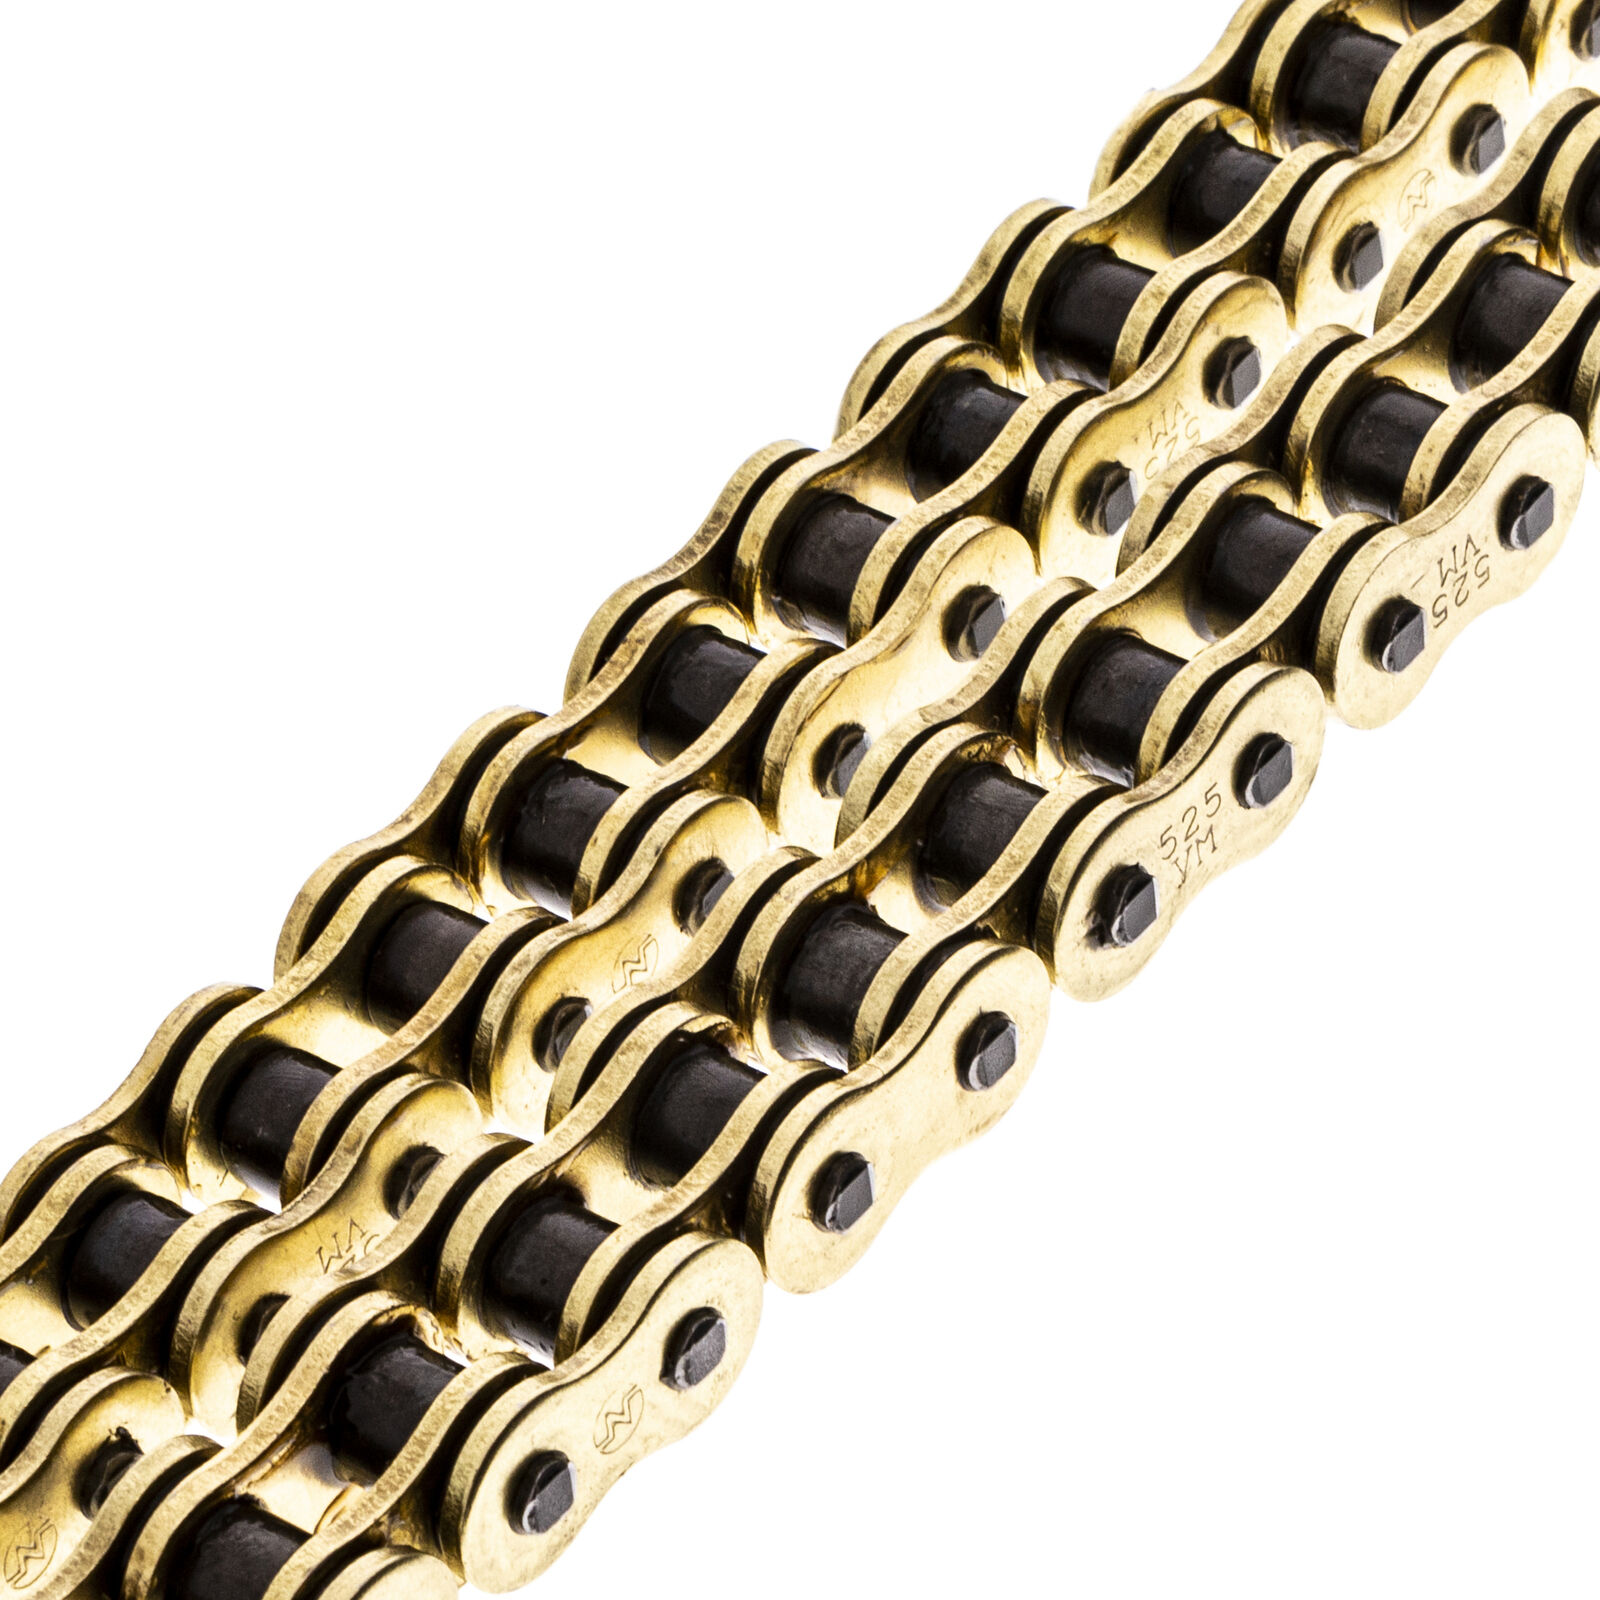 NICHE Gold 525 X-Ring Chain 110 Links With Connecting Master Link Motorcycle